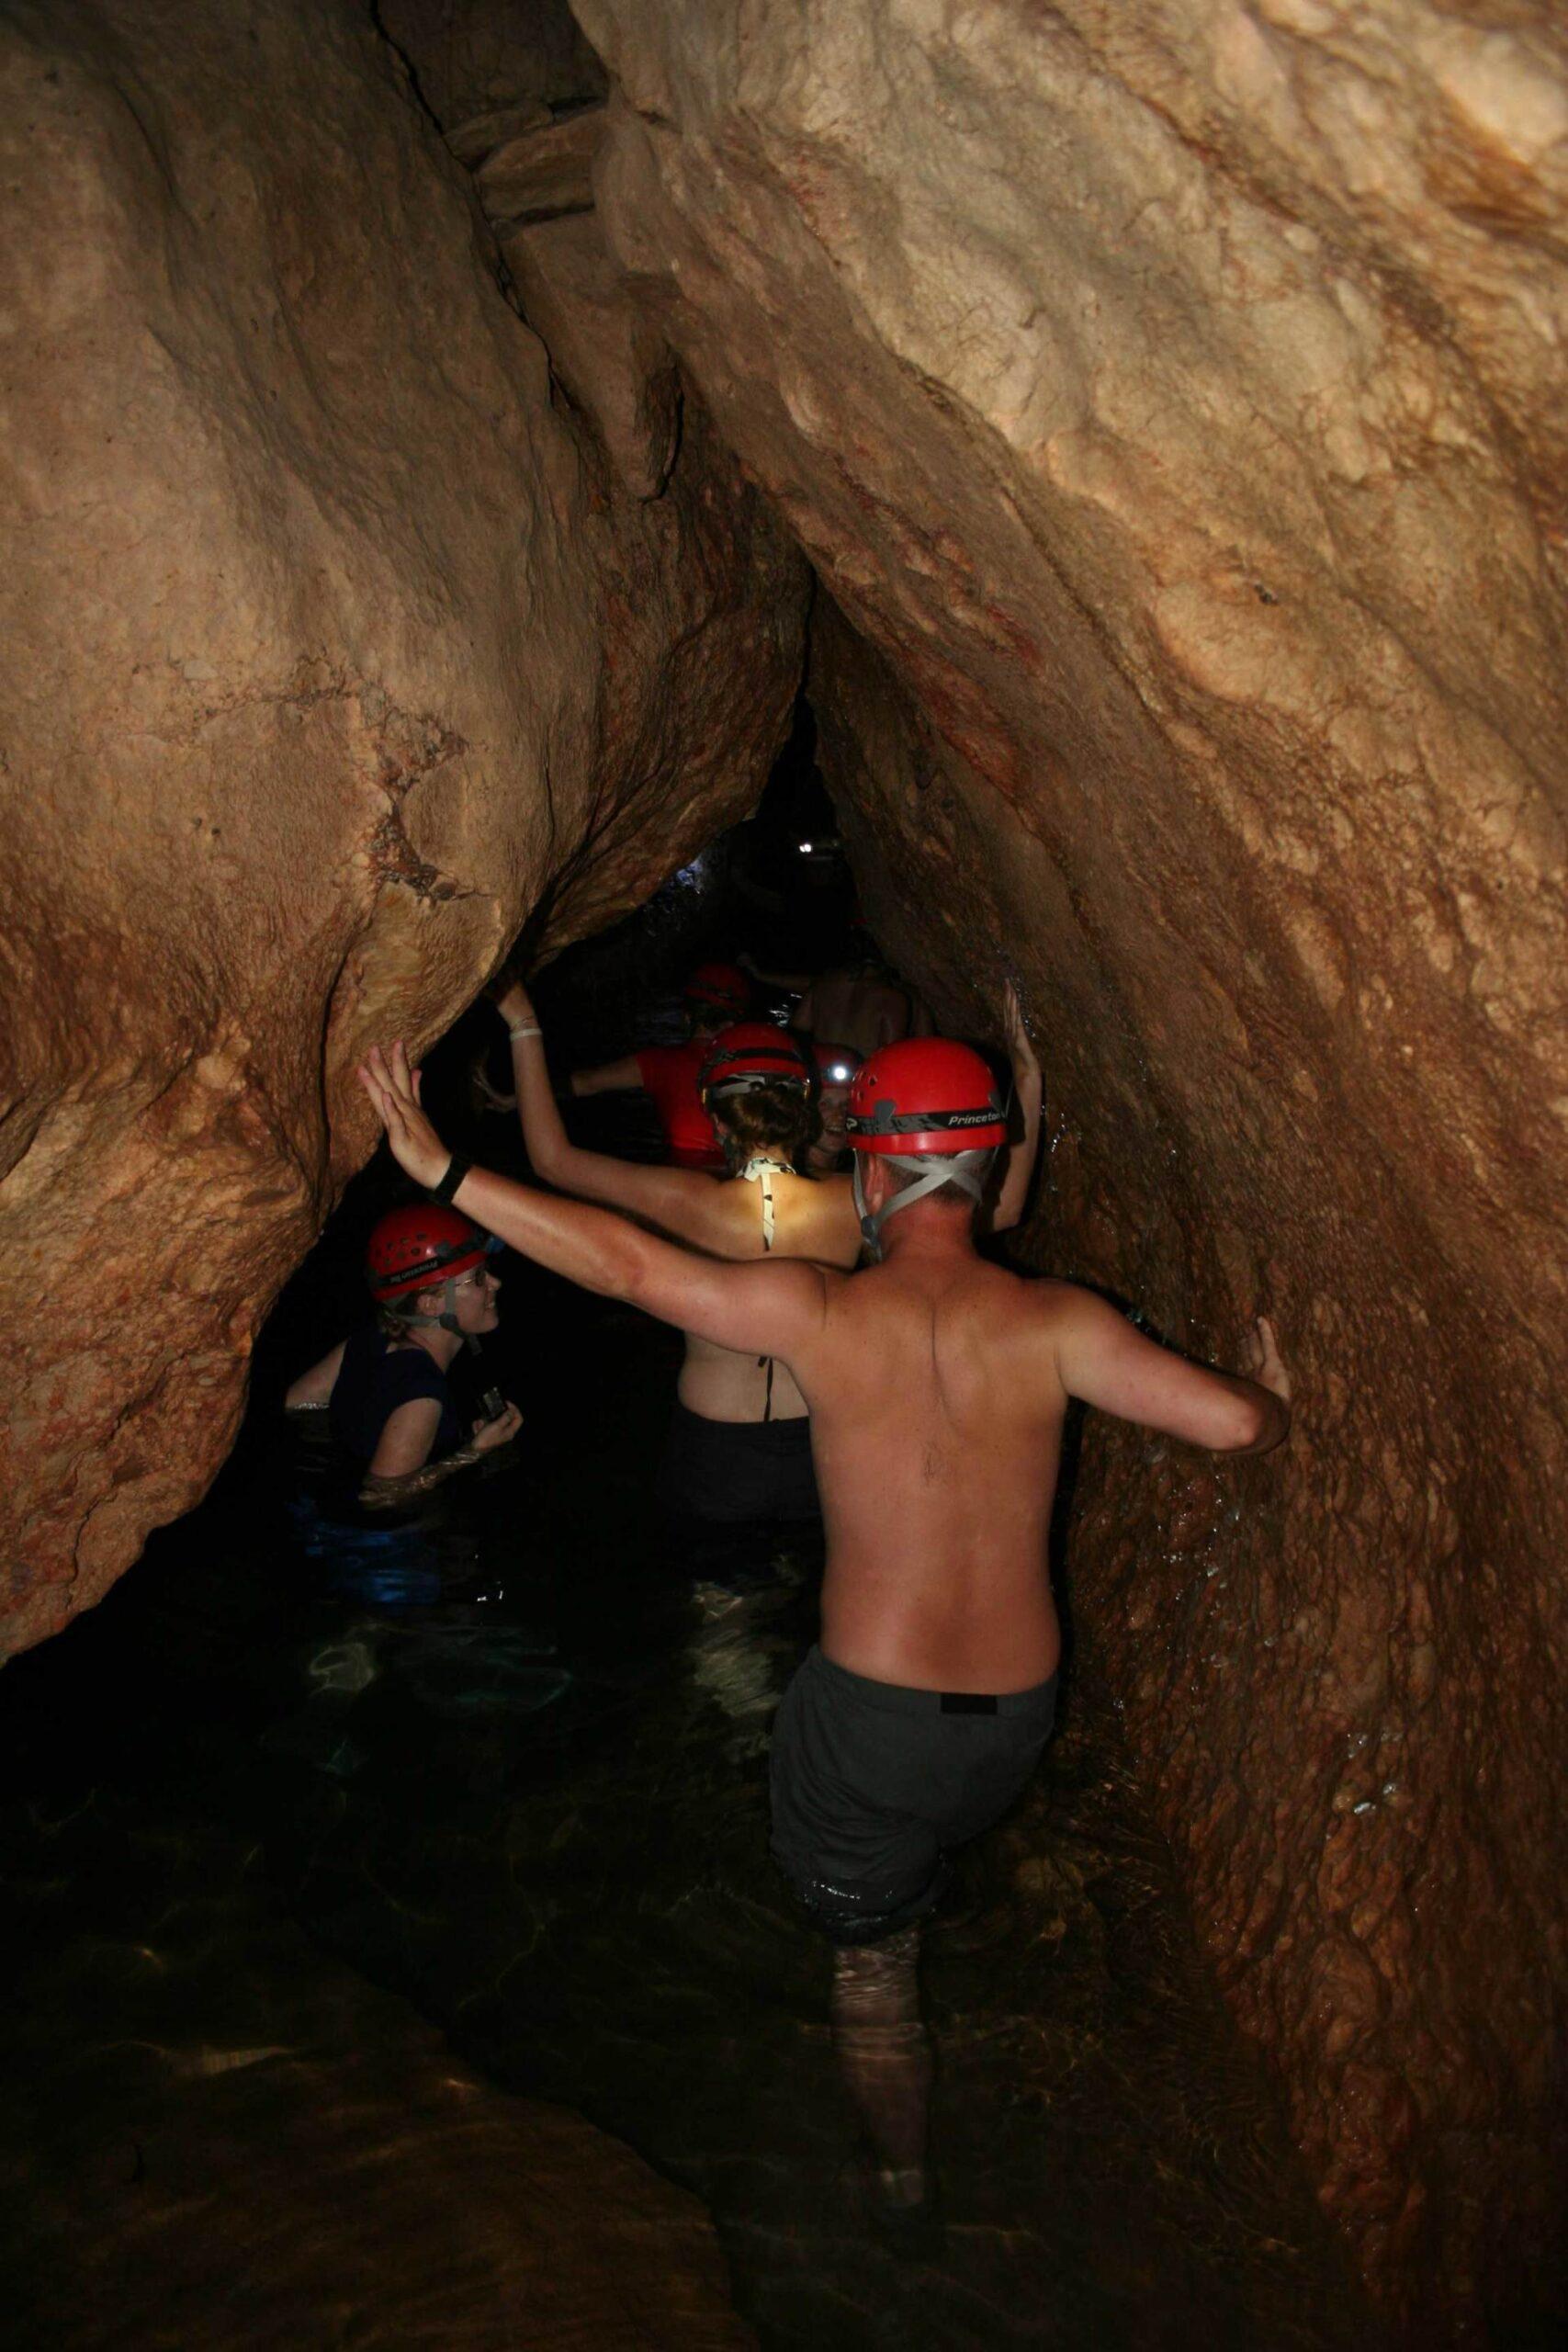 Wading through waist deep water in the cave